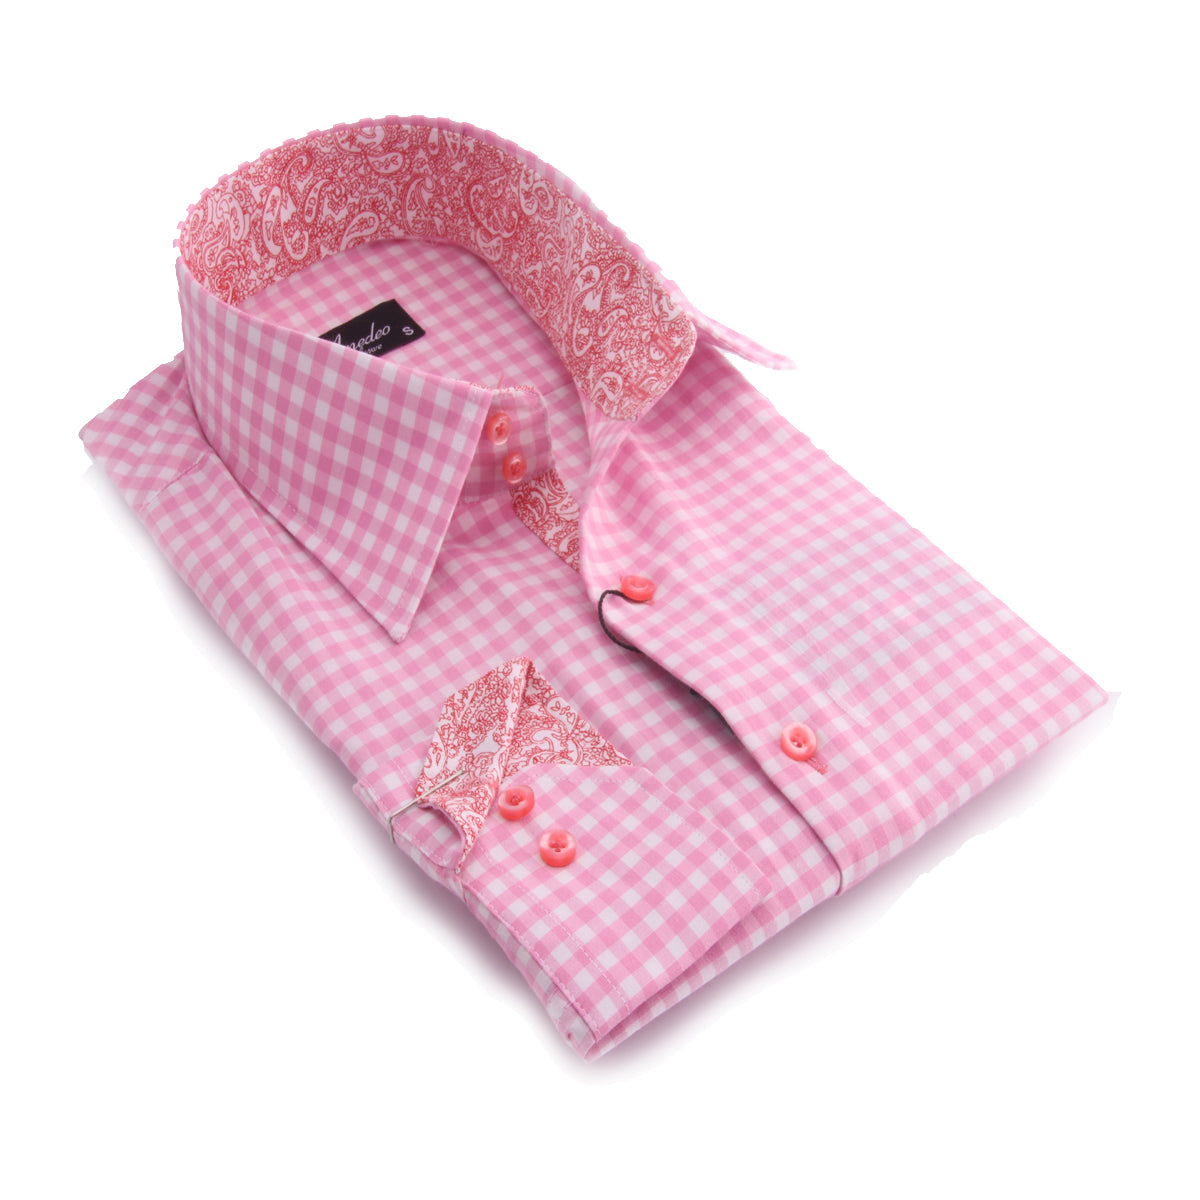 Pink and White Check Mens Slim Fit Designer Dress Shirt - tailored Cotton Shirts for Work and Casual Wear - Amedeo Exclusive